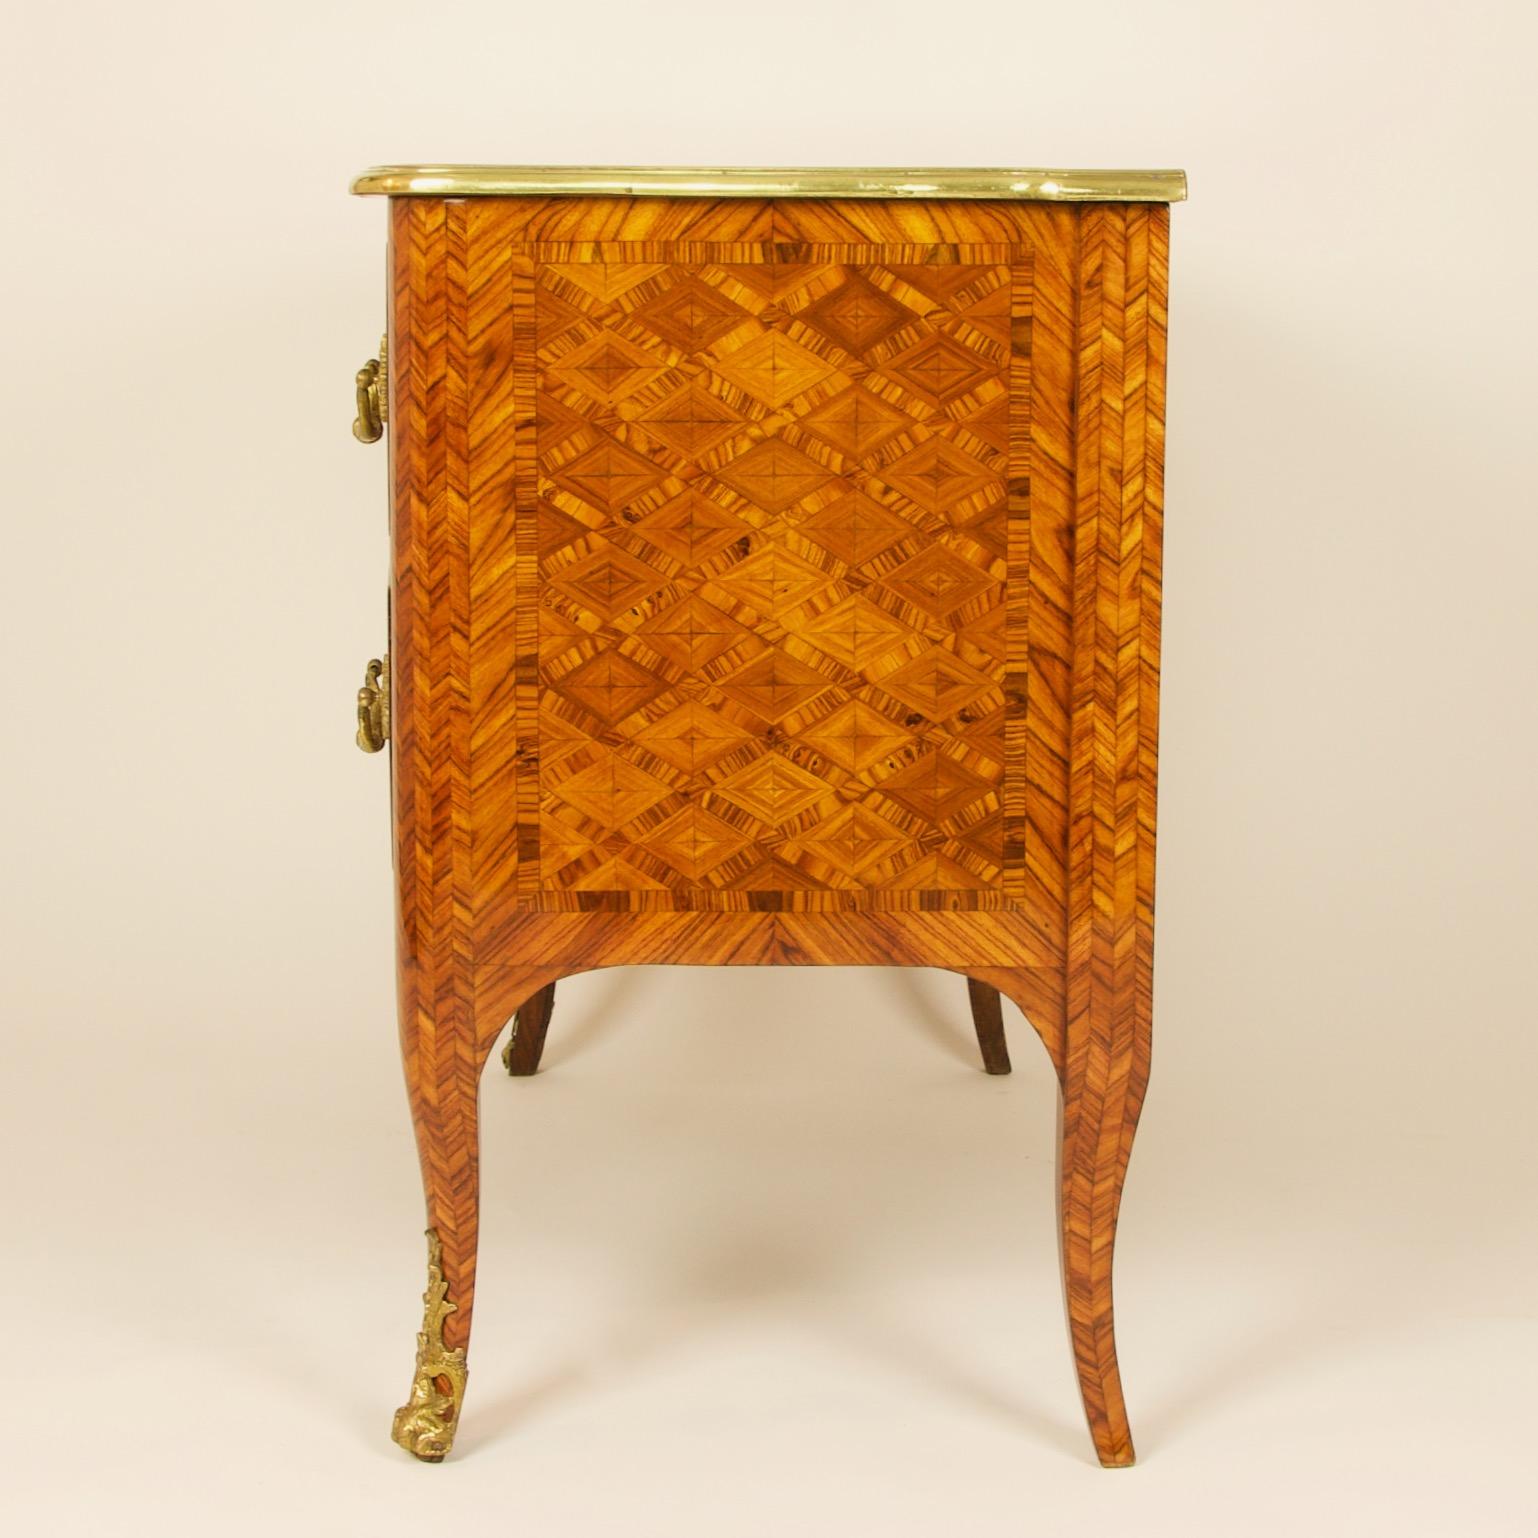 19th Century French Louis XIV Régence Trelliswork Marquetry Commode or Sauteuse For Sale 3